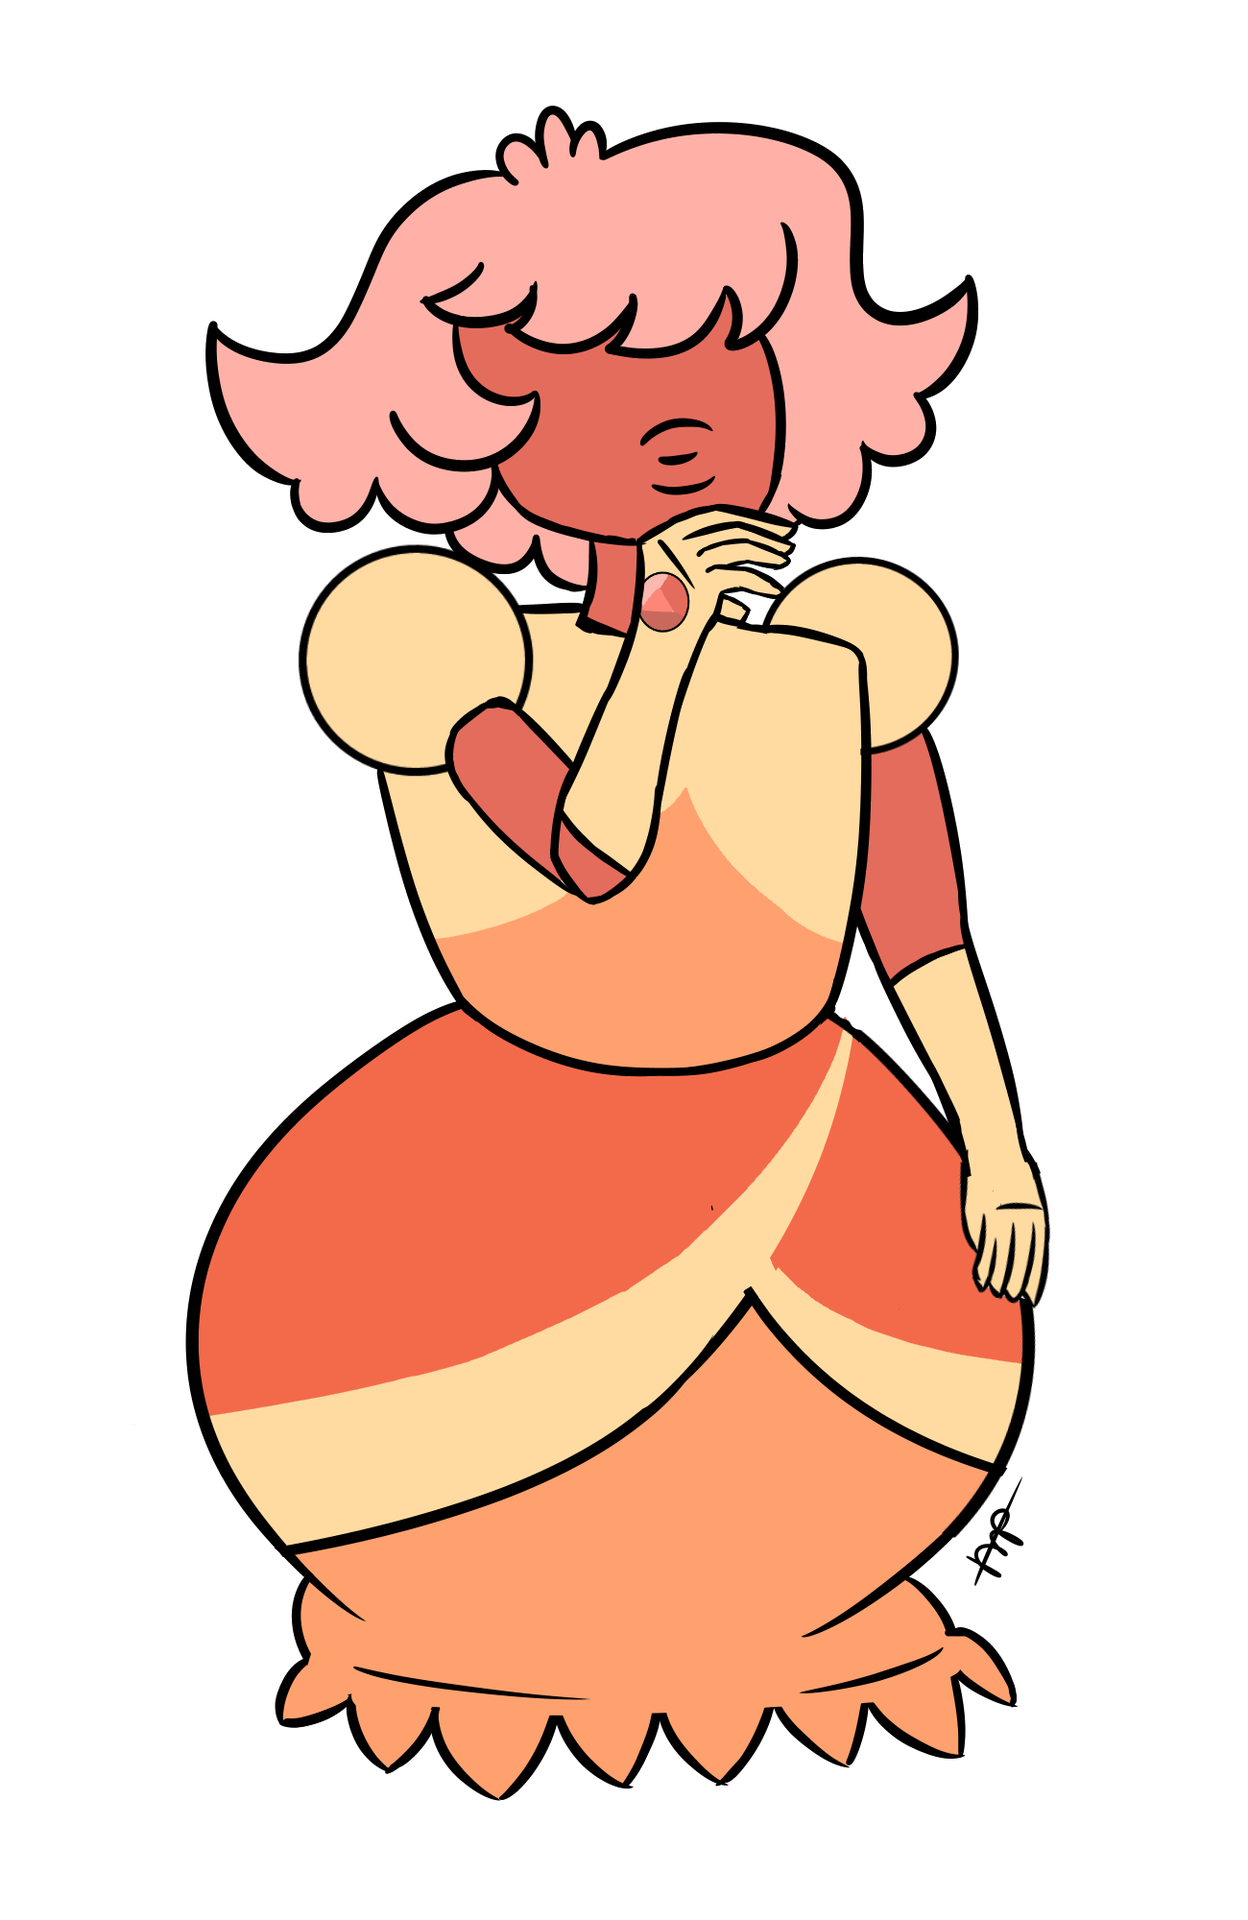 So I decided to draw Padparadscha from steven universe tonight when I got bored.